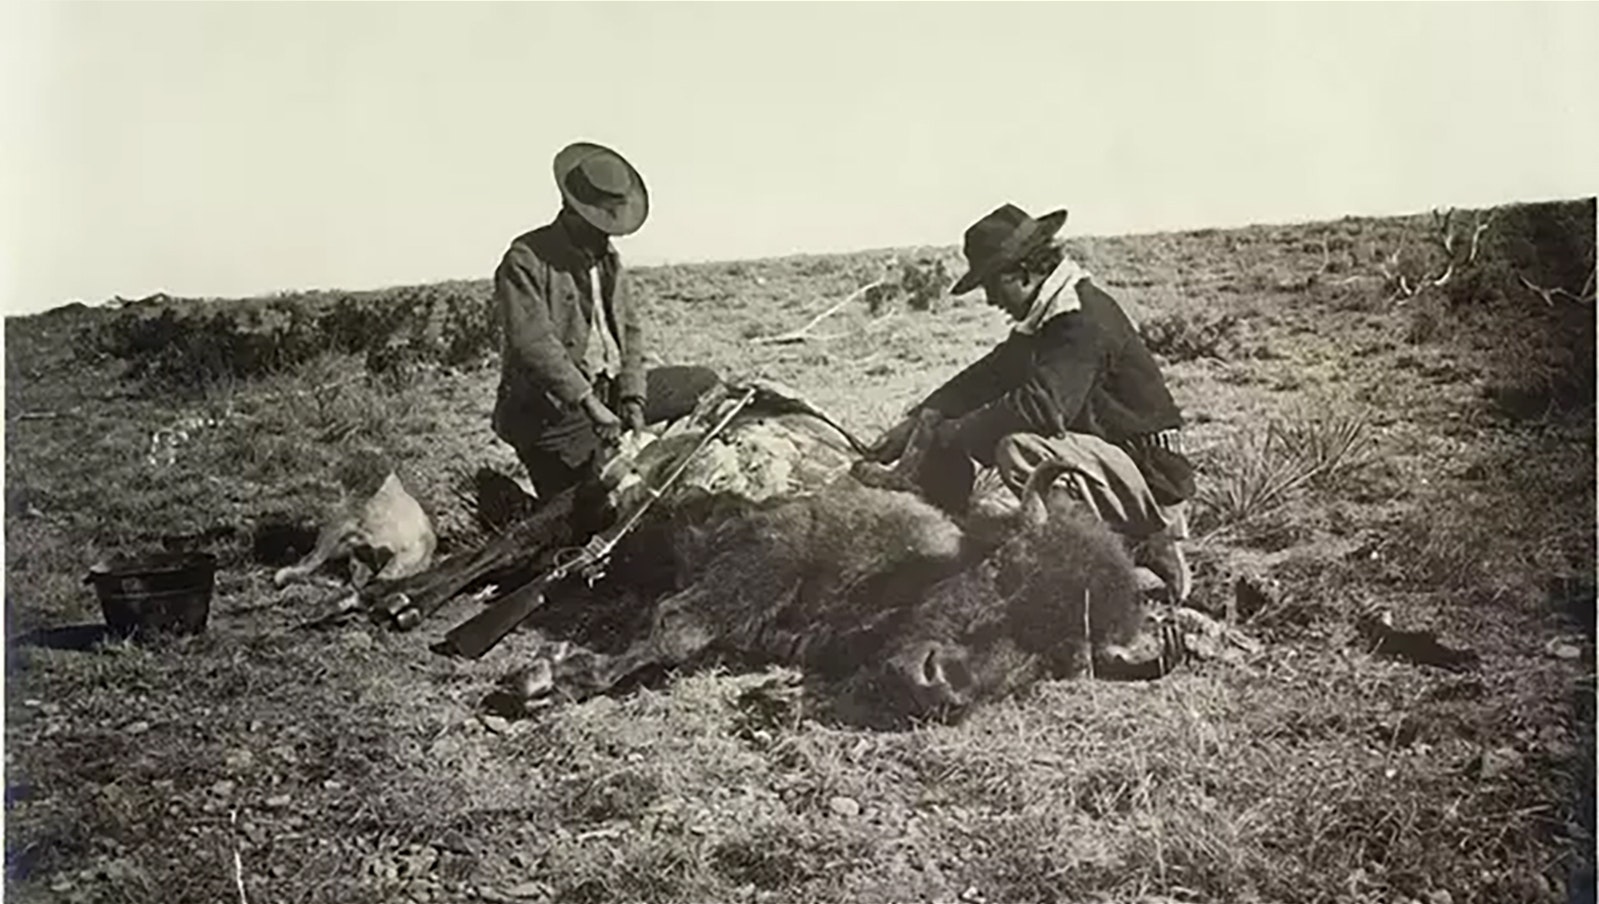 Hide hunters skin a bison on the Great Plains.